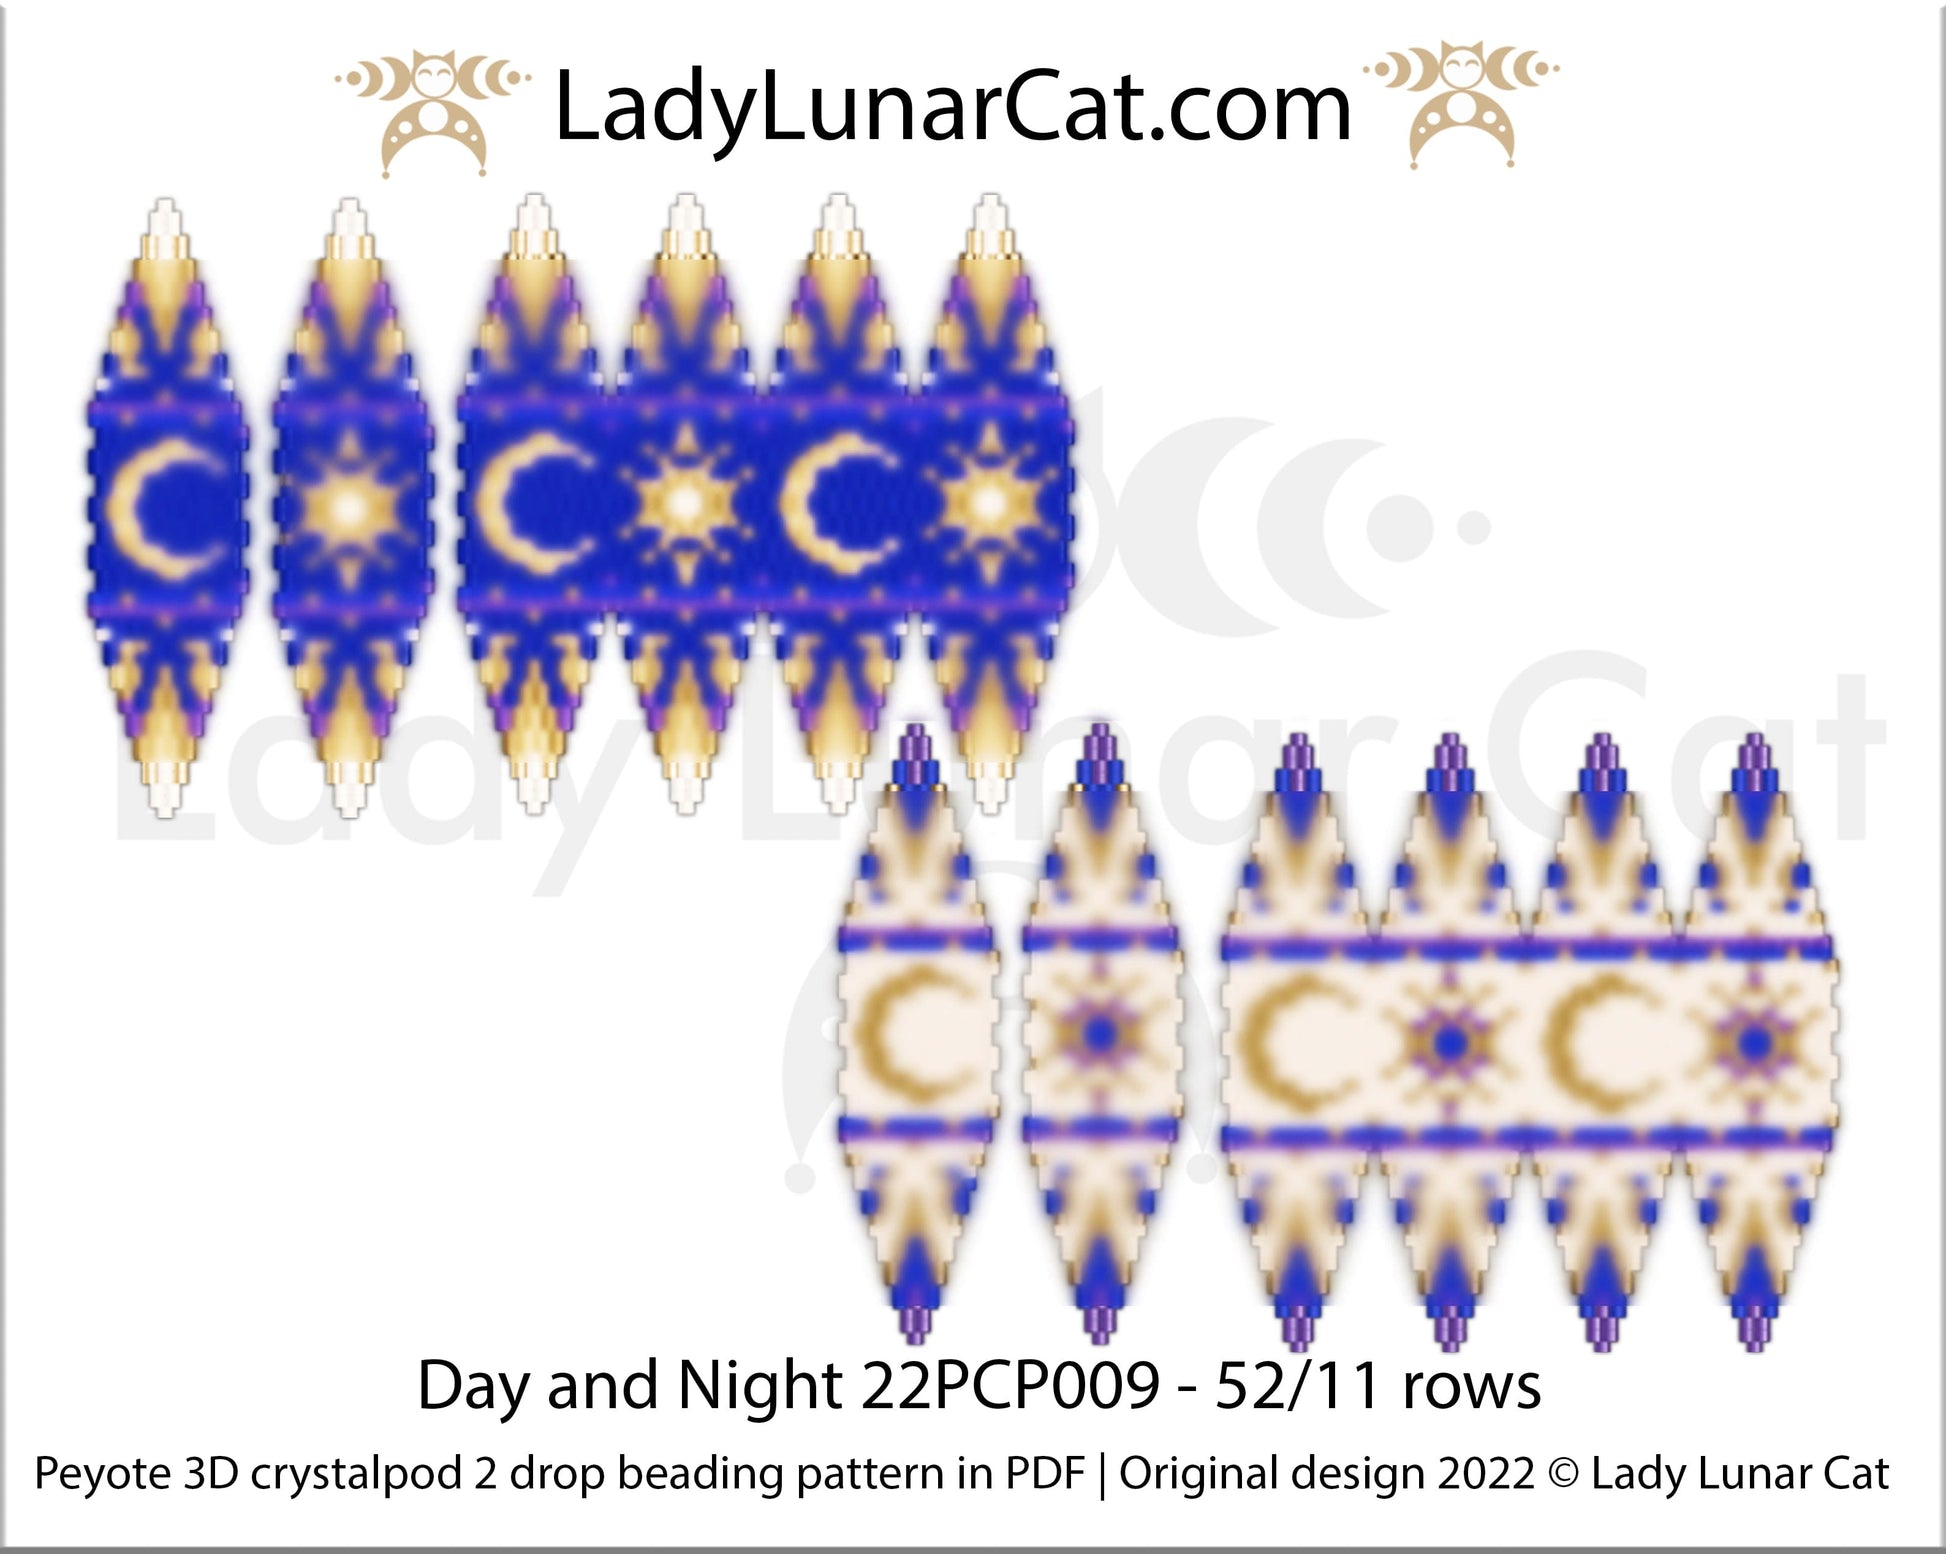 Peyote 2drop pod pattern or crystalpod pattern for beading Day and Night 22PCP009 LadyLunarCat